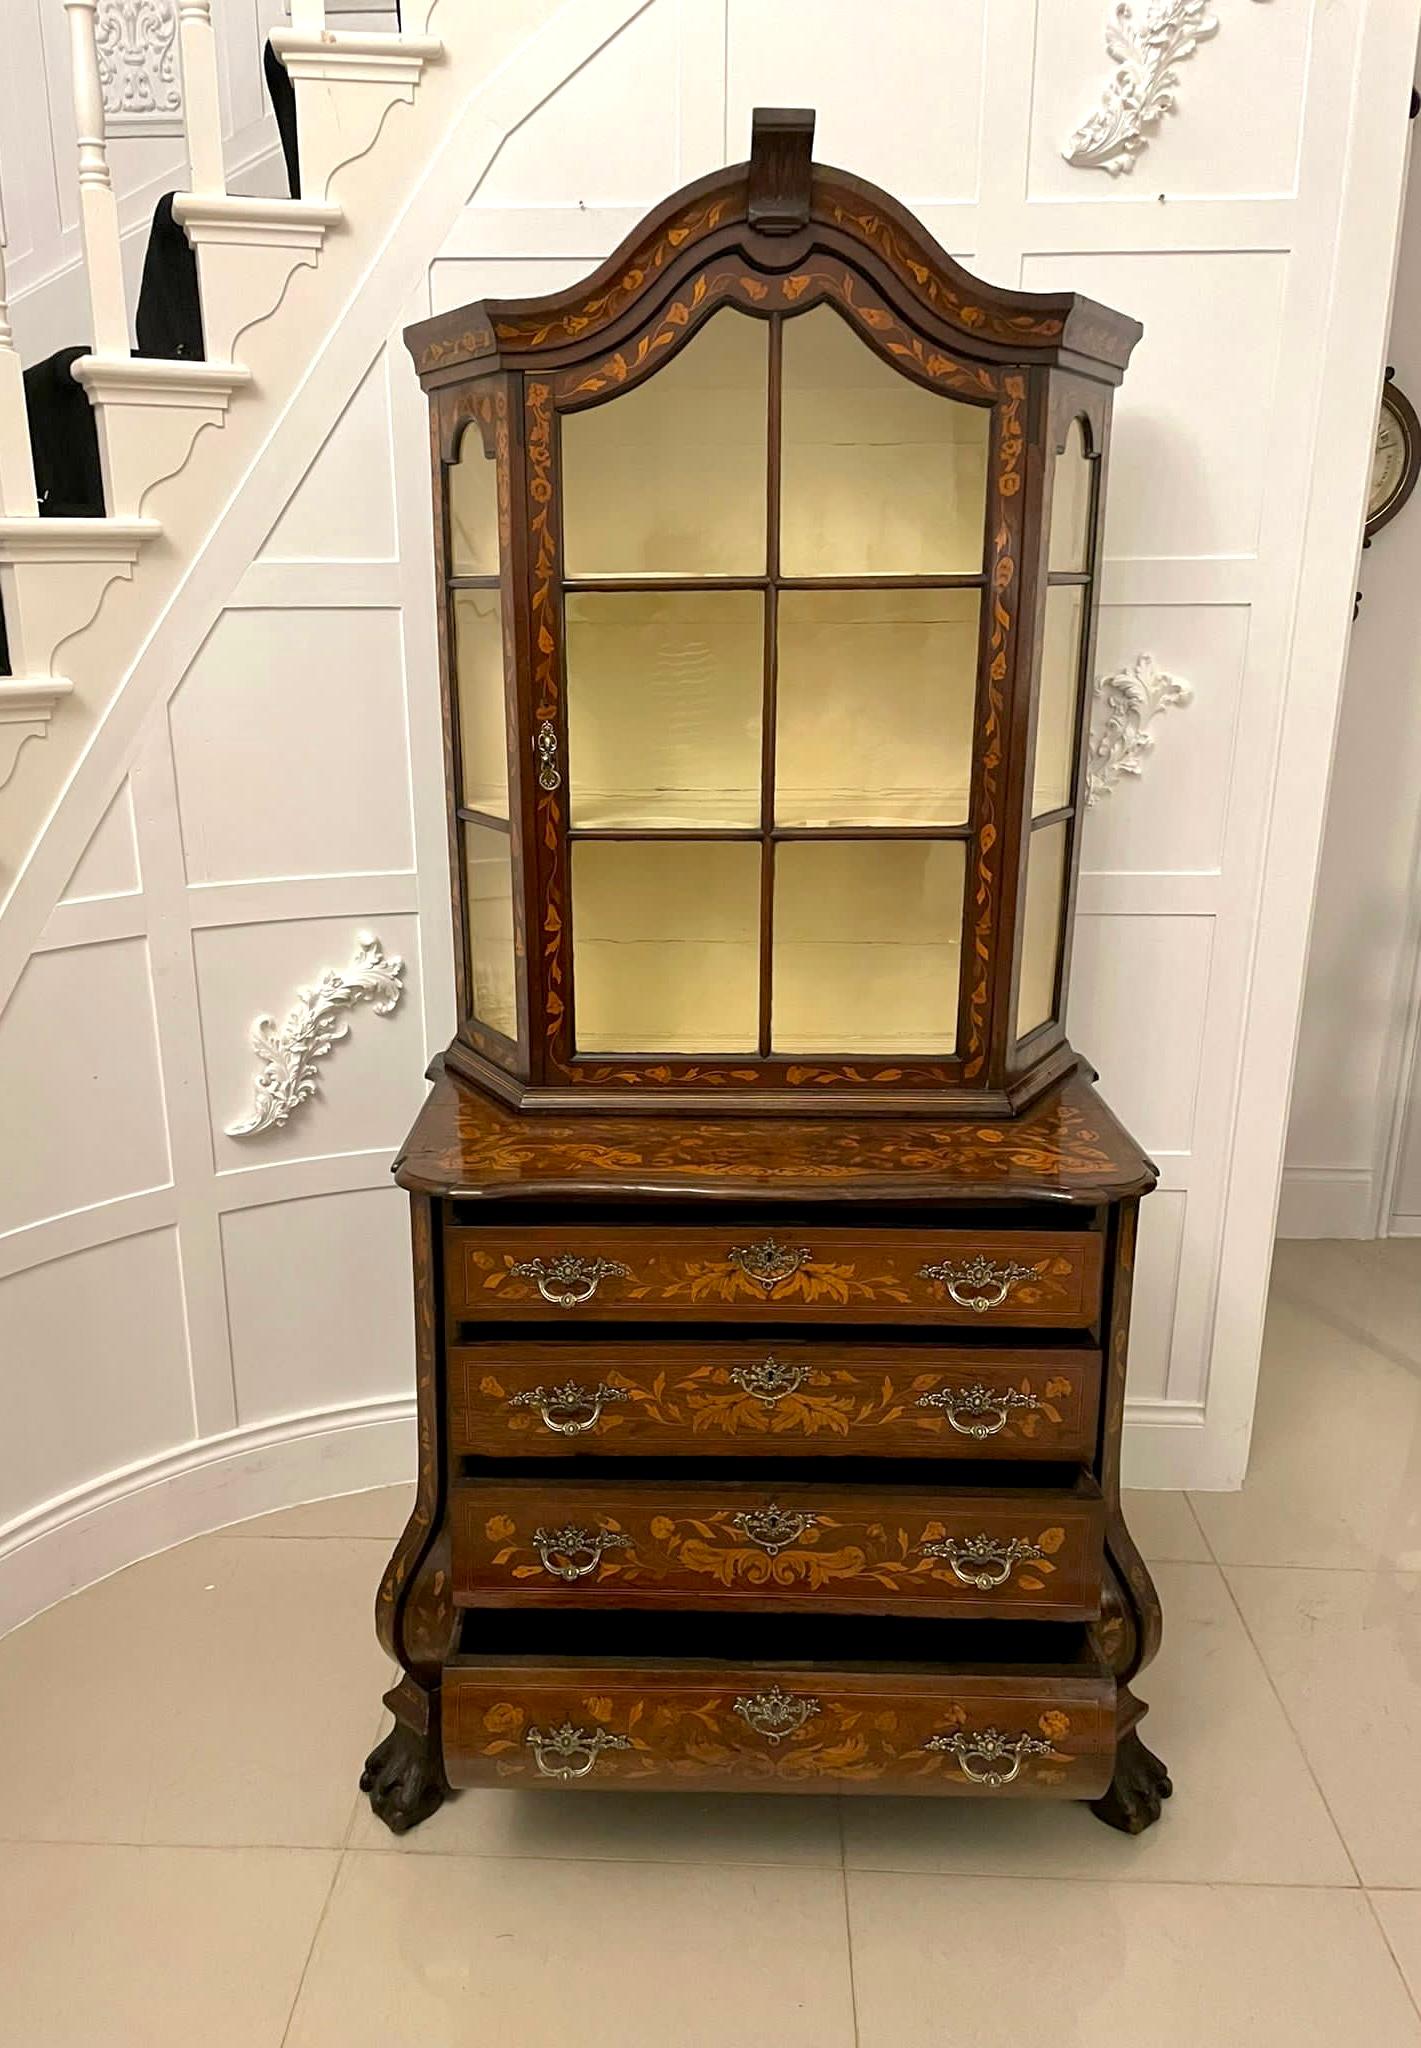 Antique 18th century quality Dutch marquetry walnut display cabinet on chest having a quality walnut floral marquetry inlaid display cabinet with a single glazed door and sides opening to reveal two shaped shelves above a walnut floral marquetry